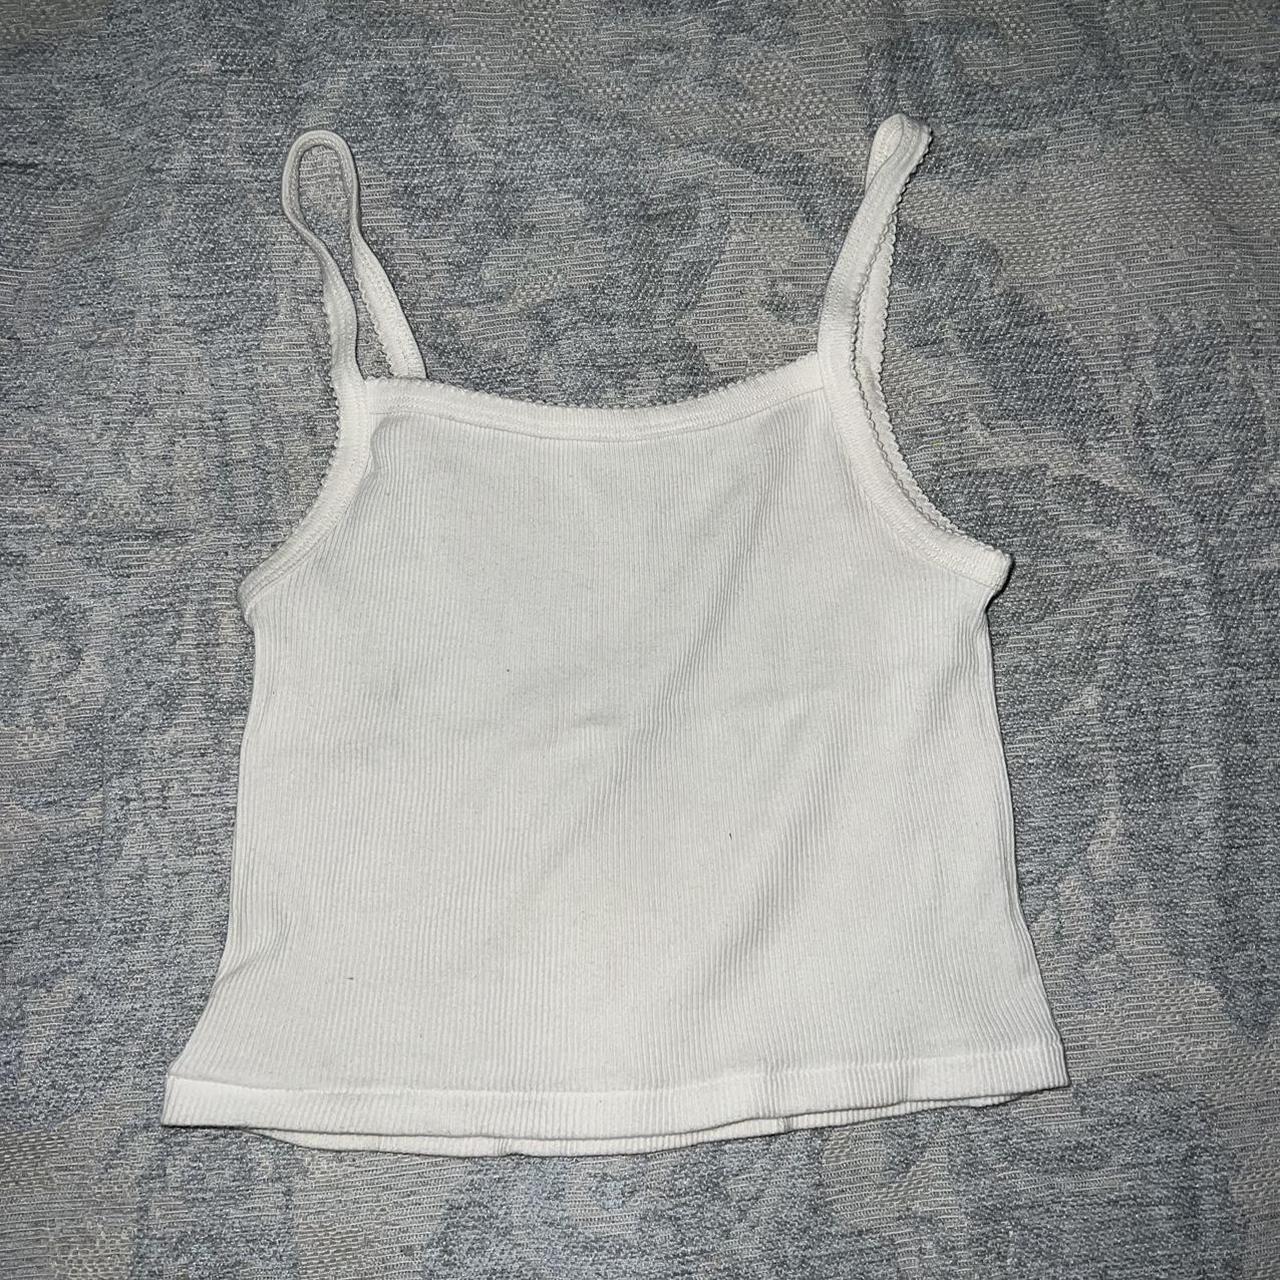 Brandy Melville White Tank Only Worn Once! Perfect - Depop